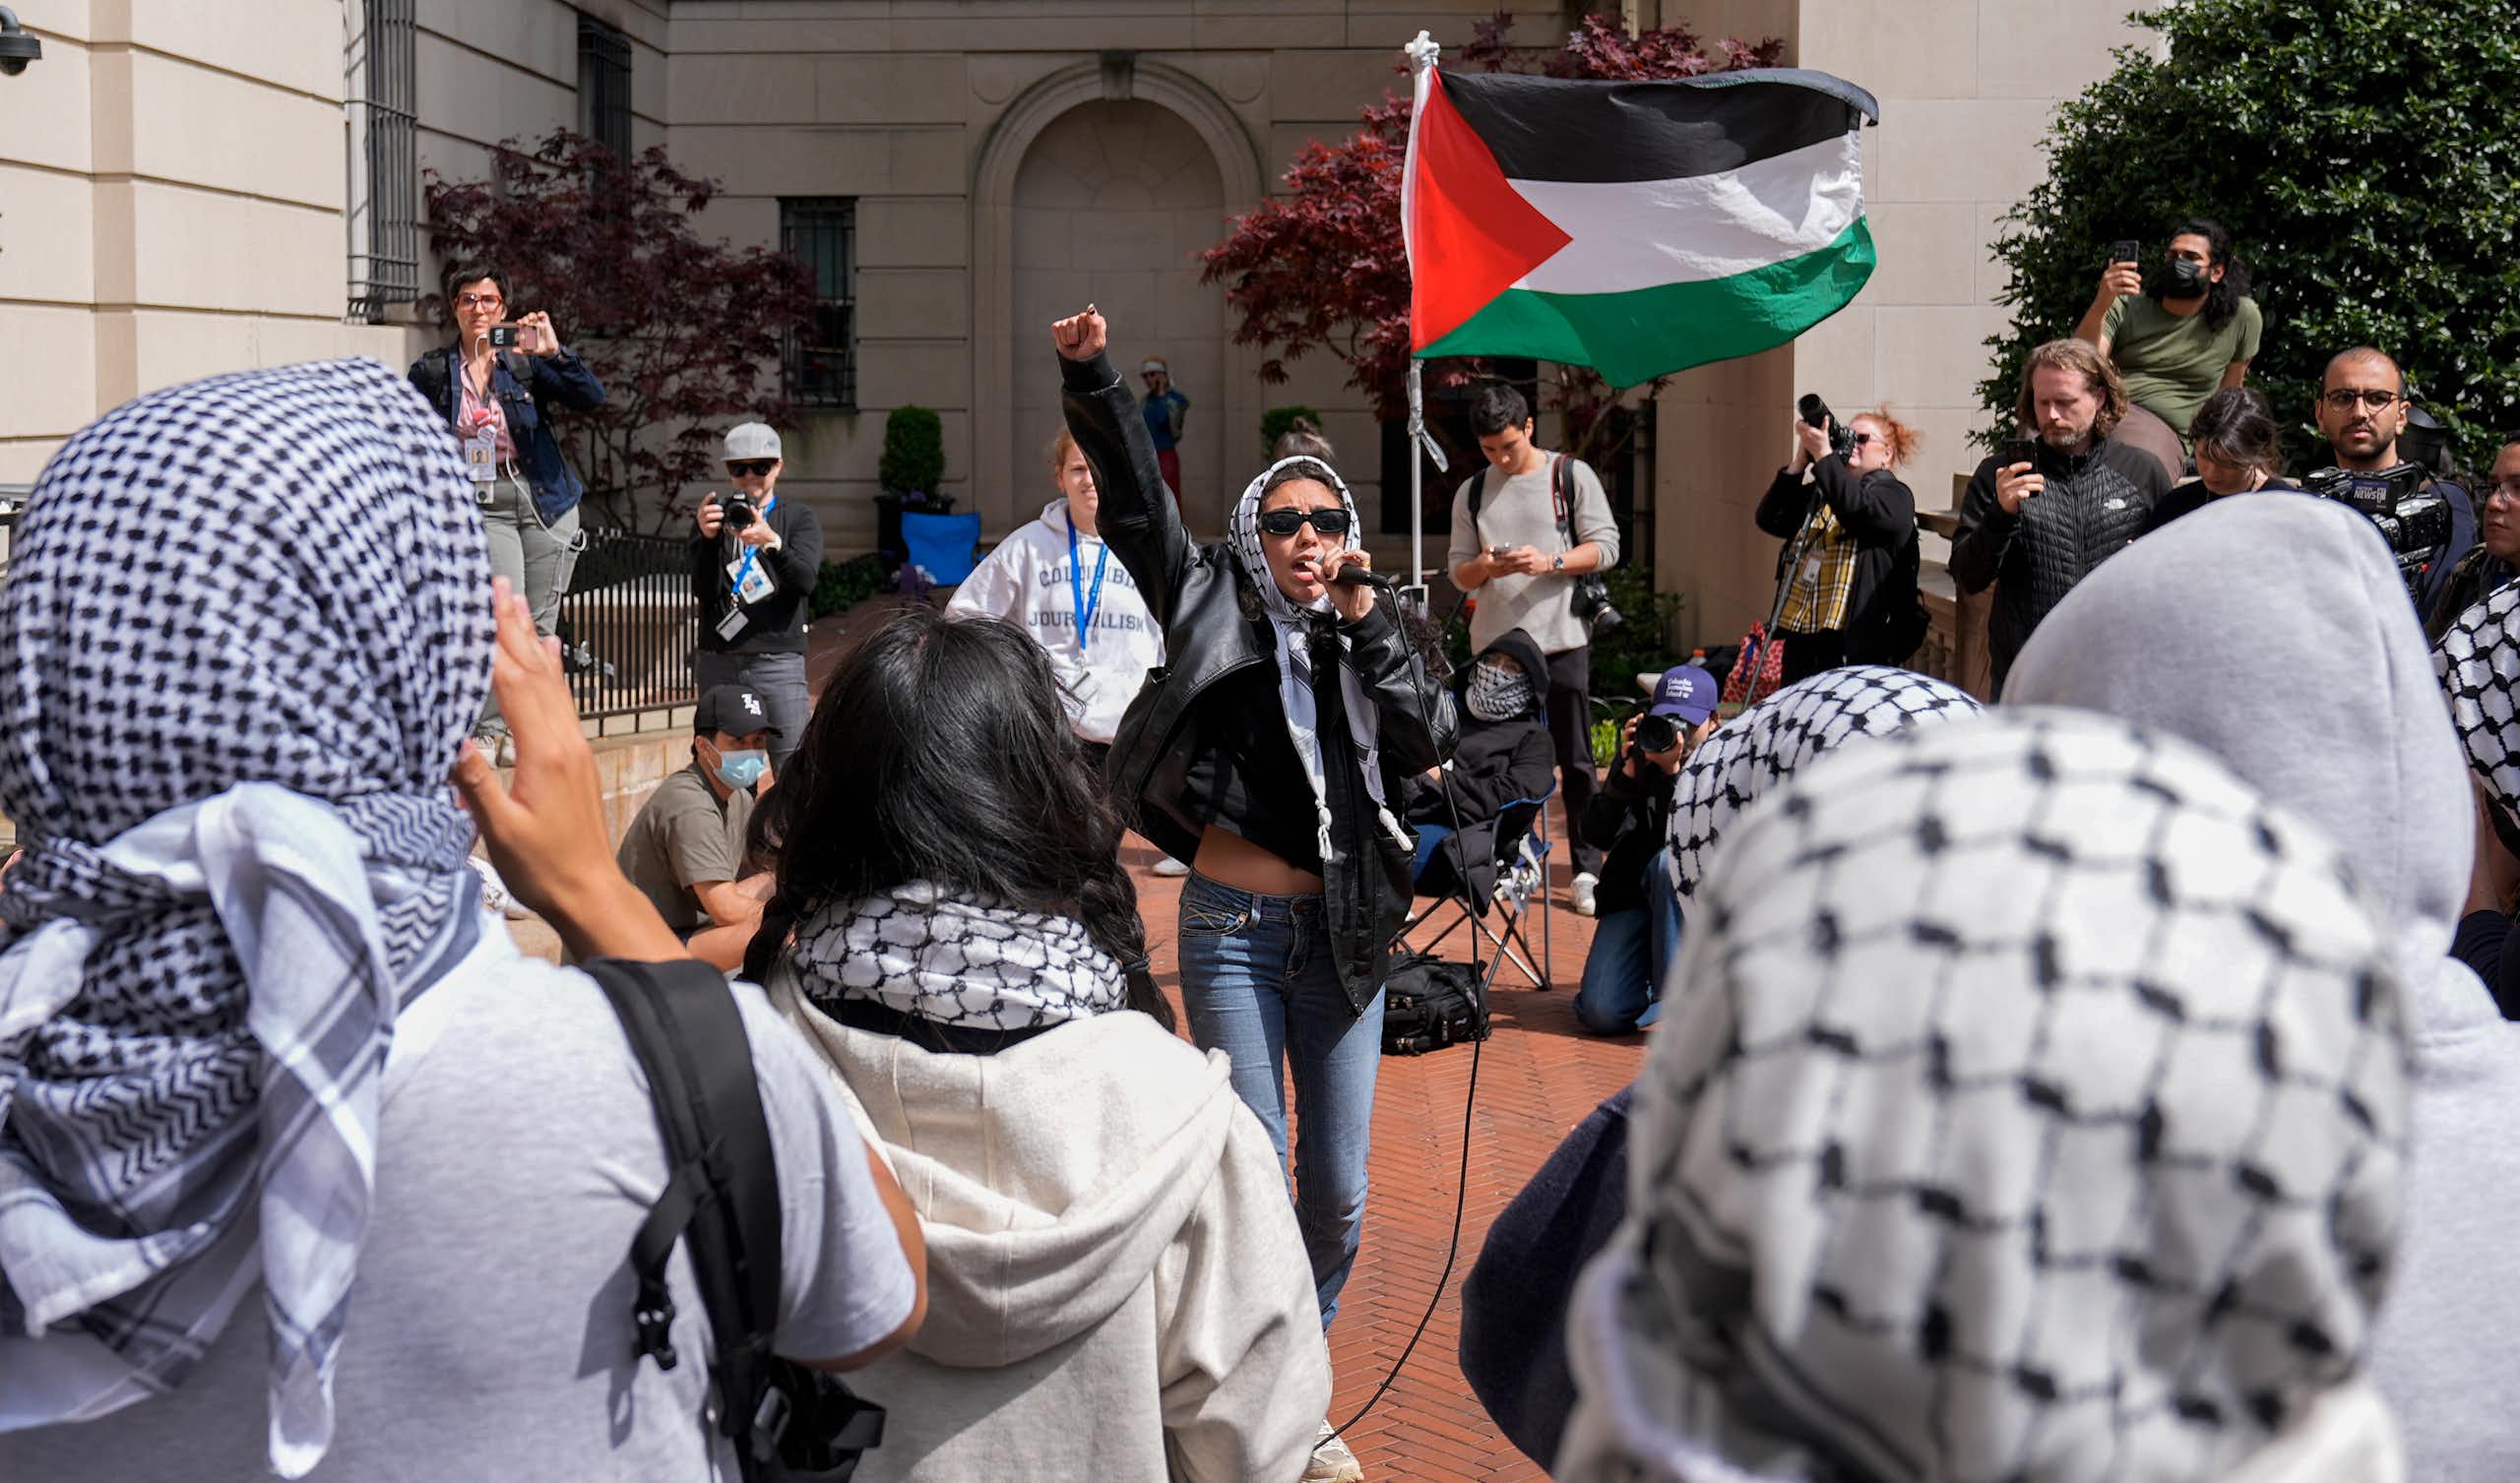 Woman in sunglasses waves a Palestinian red, green, white and black flag surrounded by people wearing keffiyah.